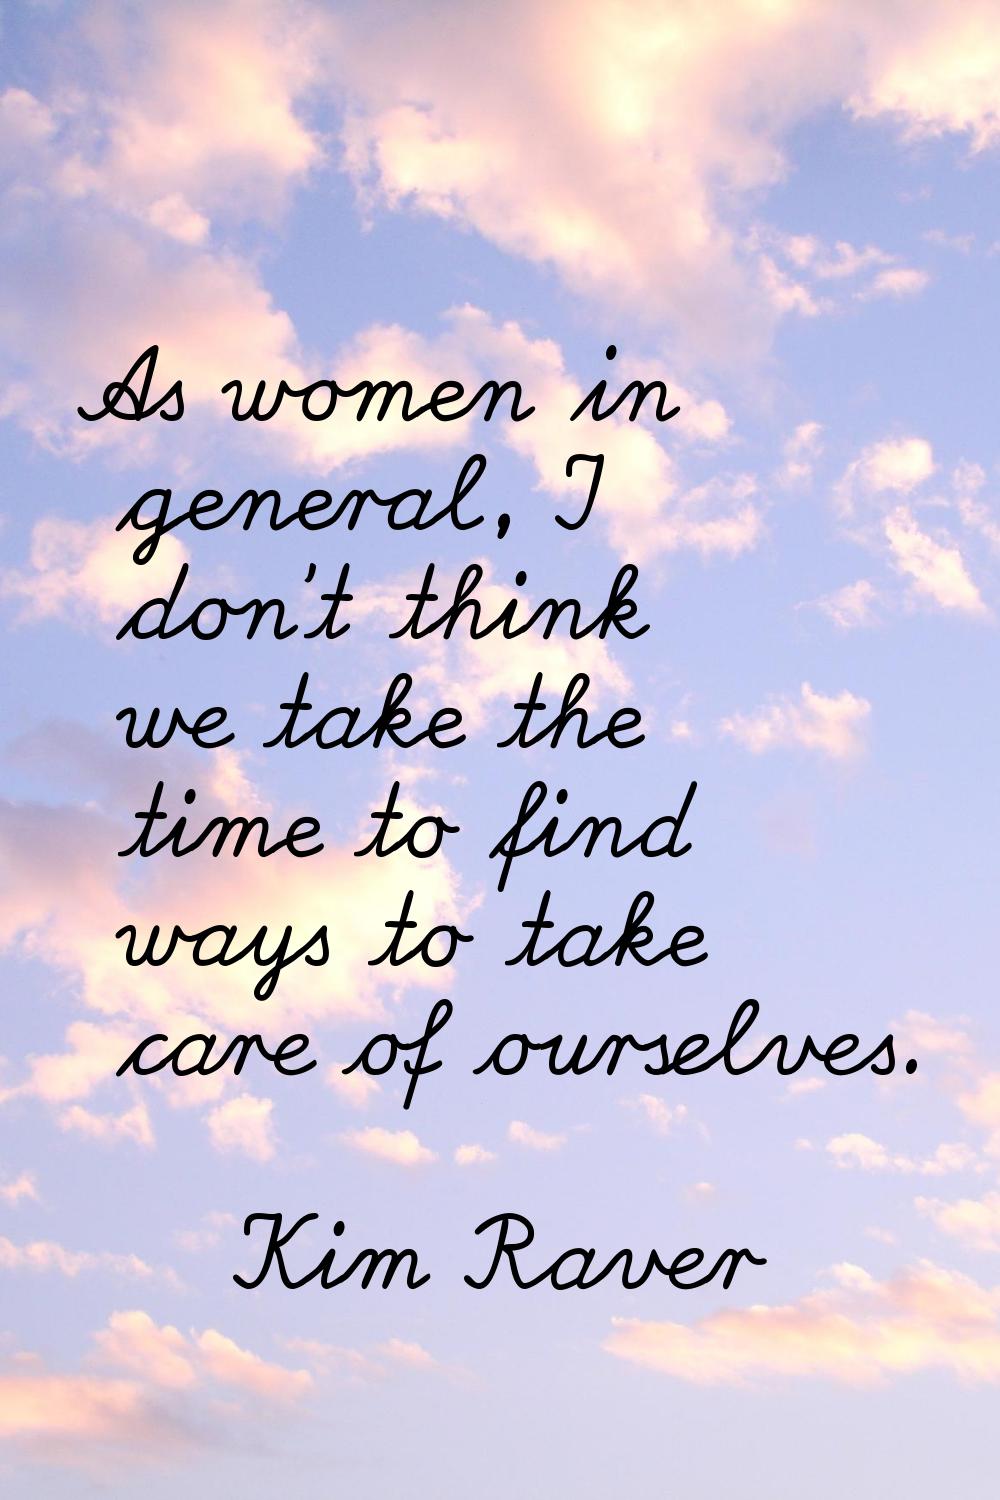 As women in general, I don't think we take the time to find ways to take care of ourselves.